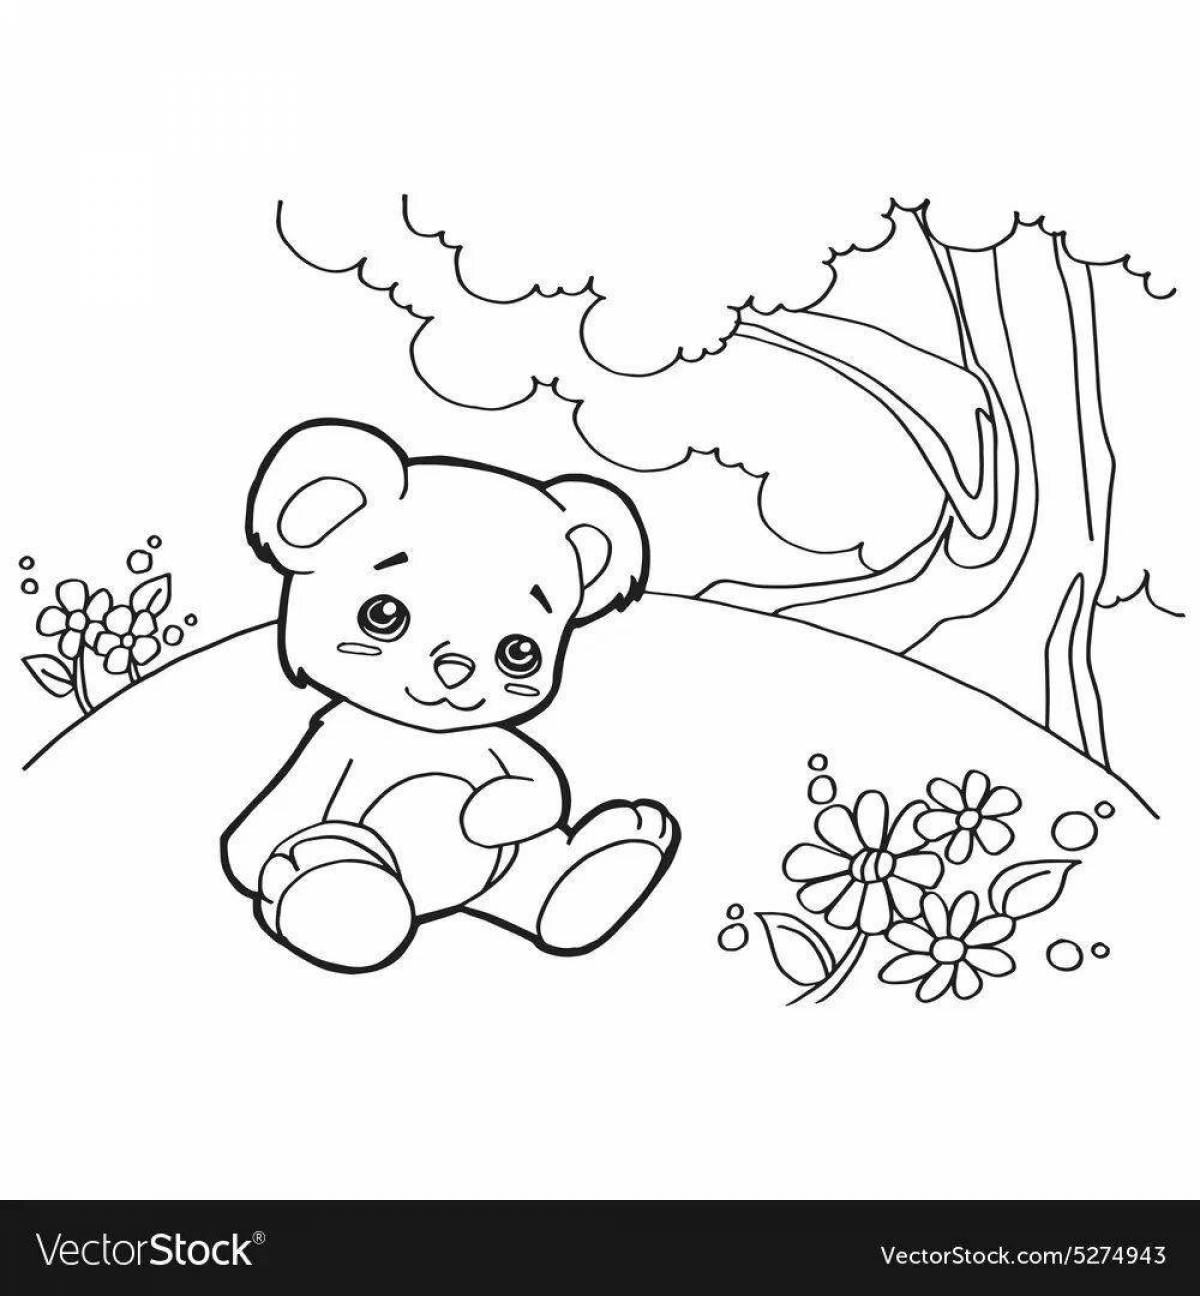 Cute bear in the lair coloring book for kids